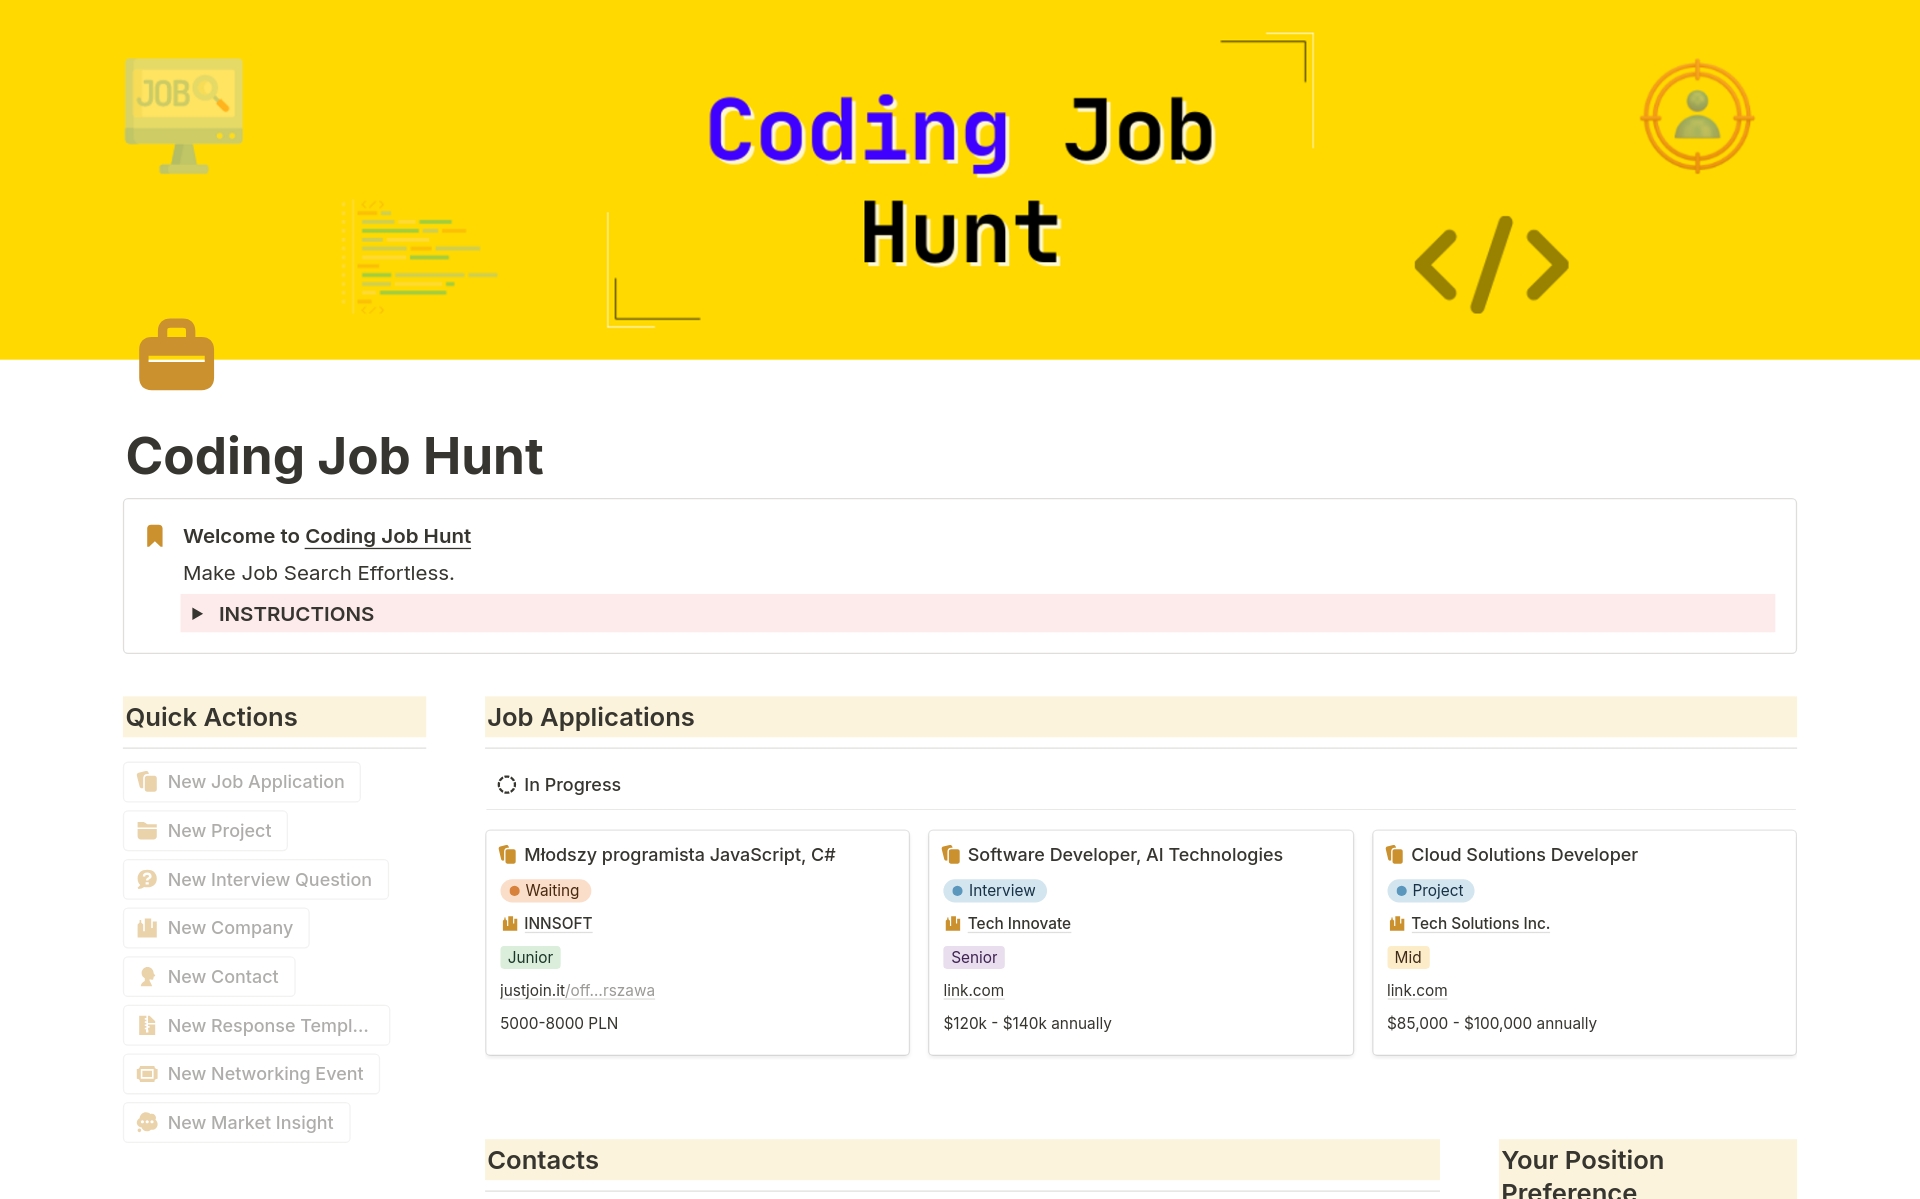 Make Job Search Effortless. Do you want to keep everything organized to make your coding job search effortless? Presenting you Coding Job Hunt. An Ultimate solution for tracking everything in one place.